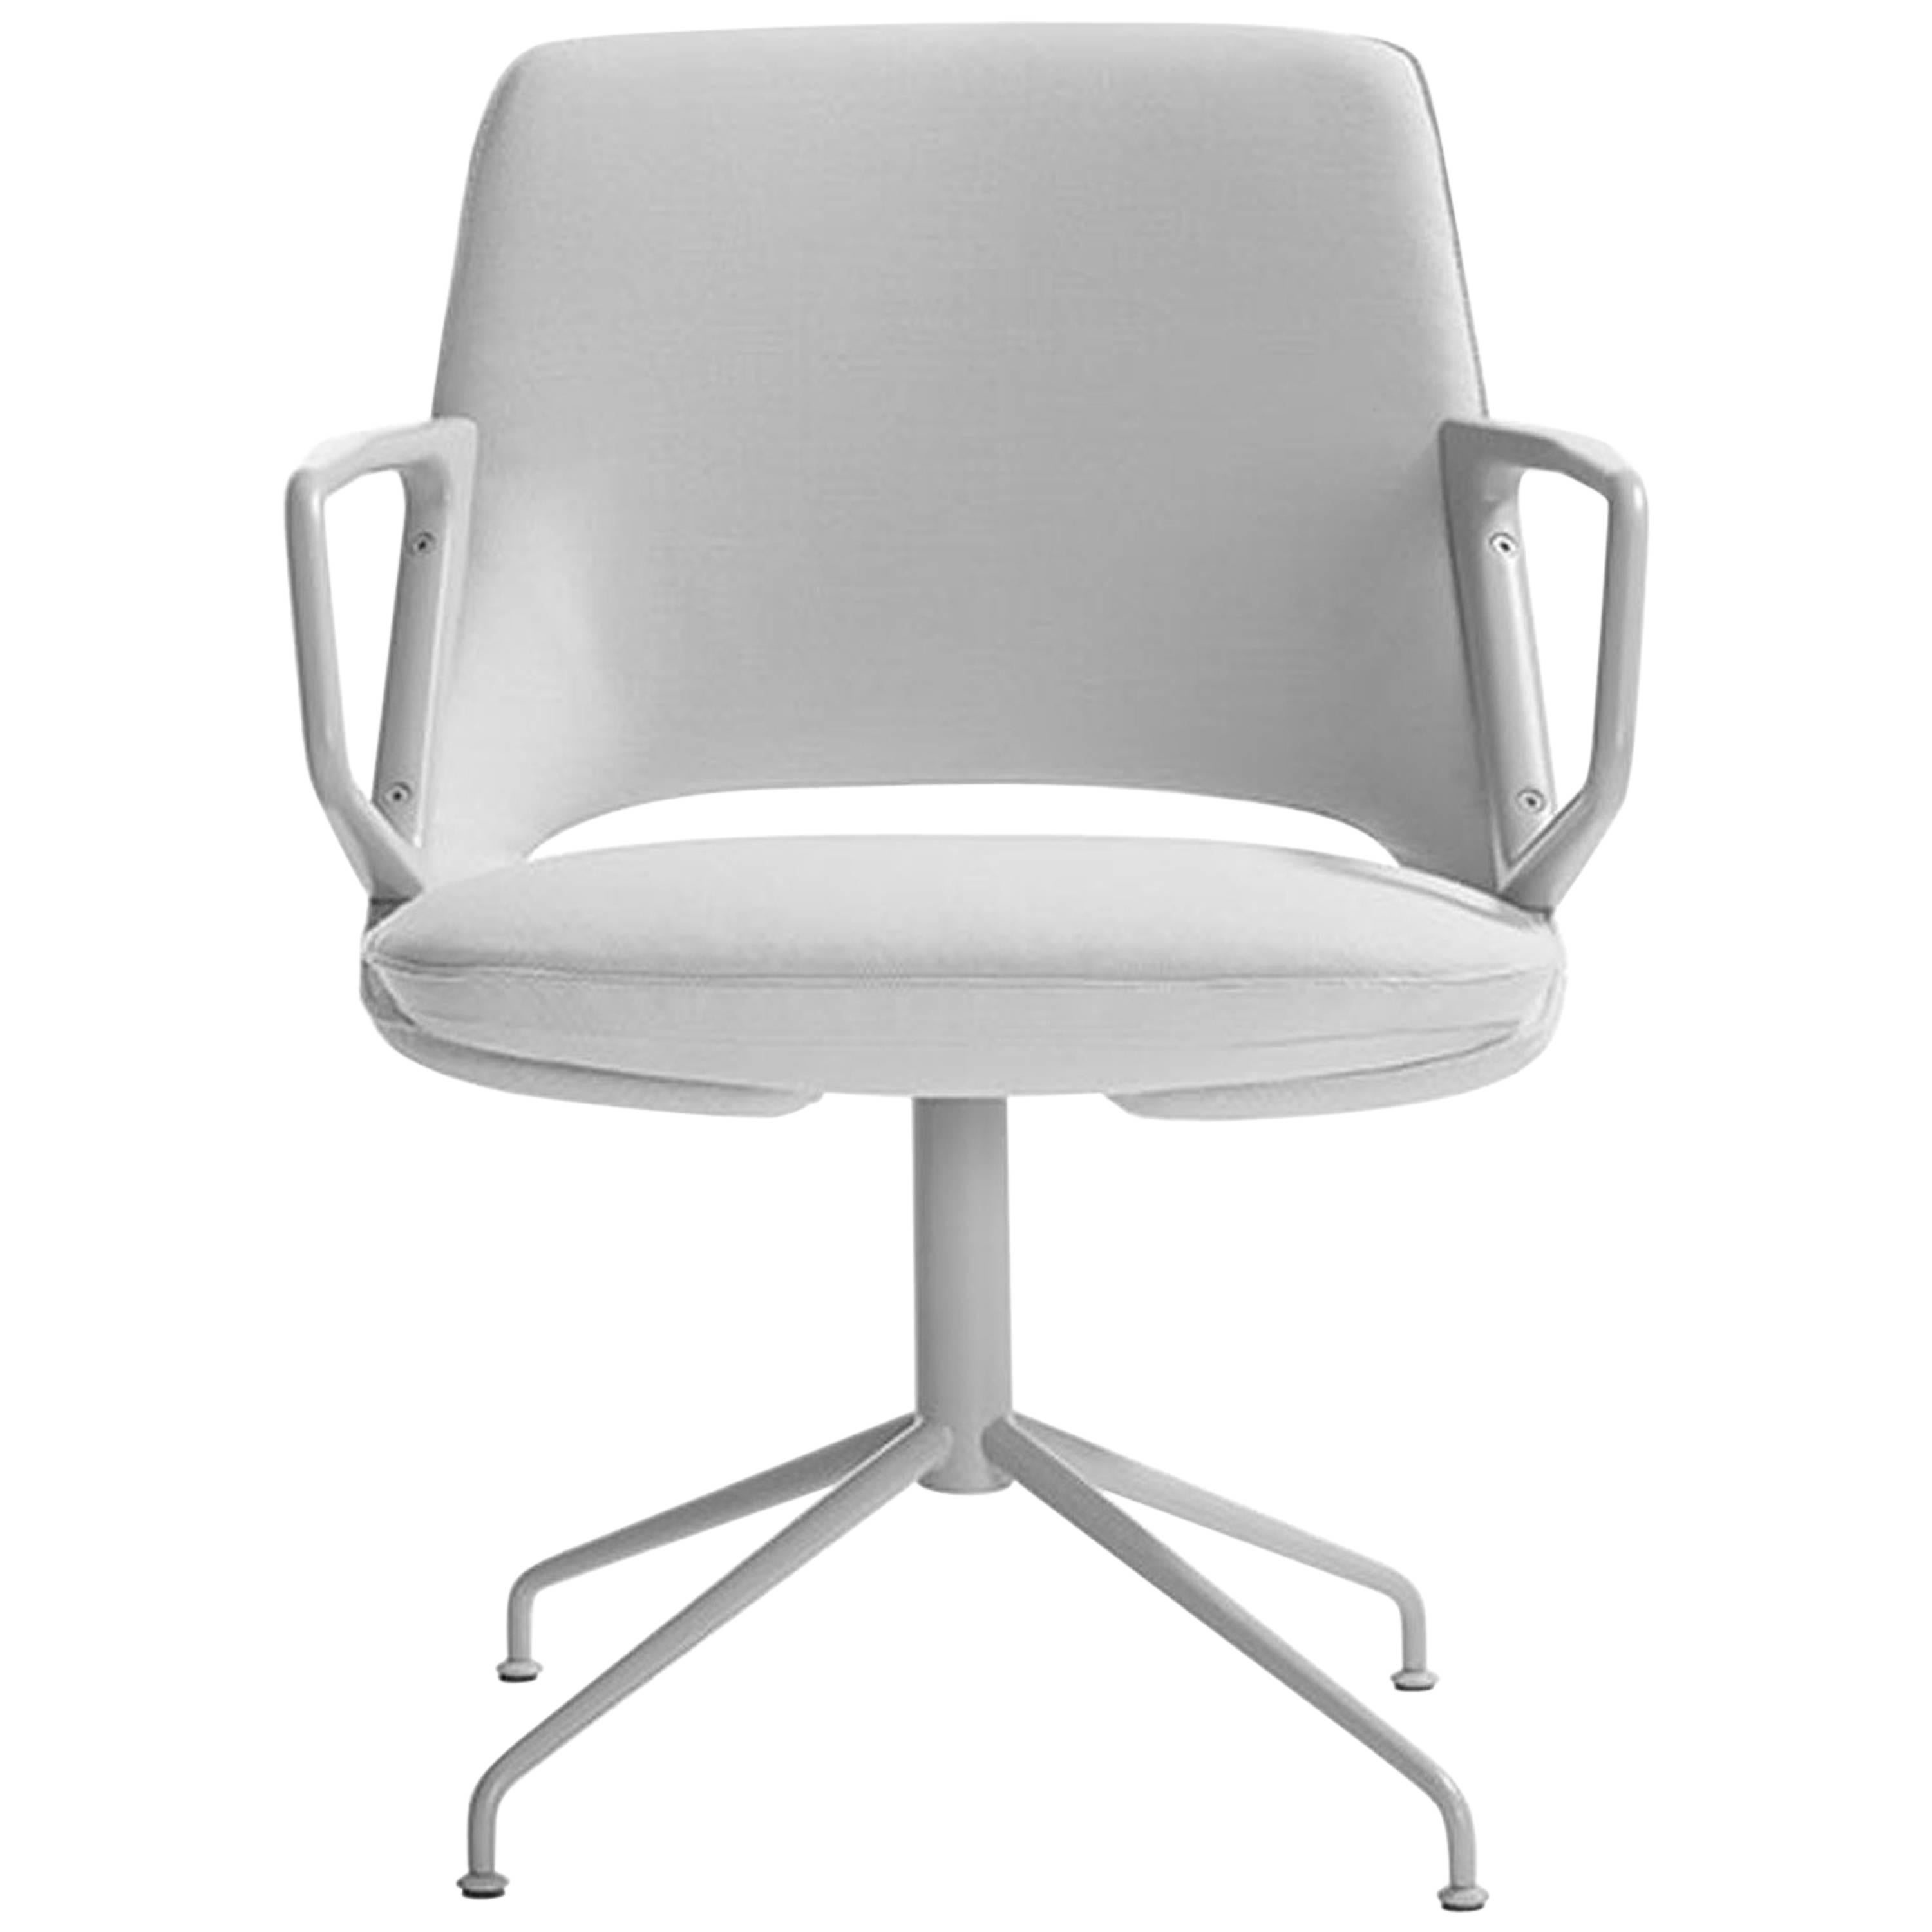 Light and Ergonomic Zuma Low Back Chair by Patric Norguet